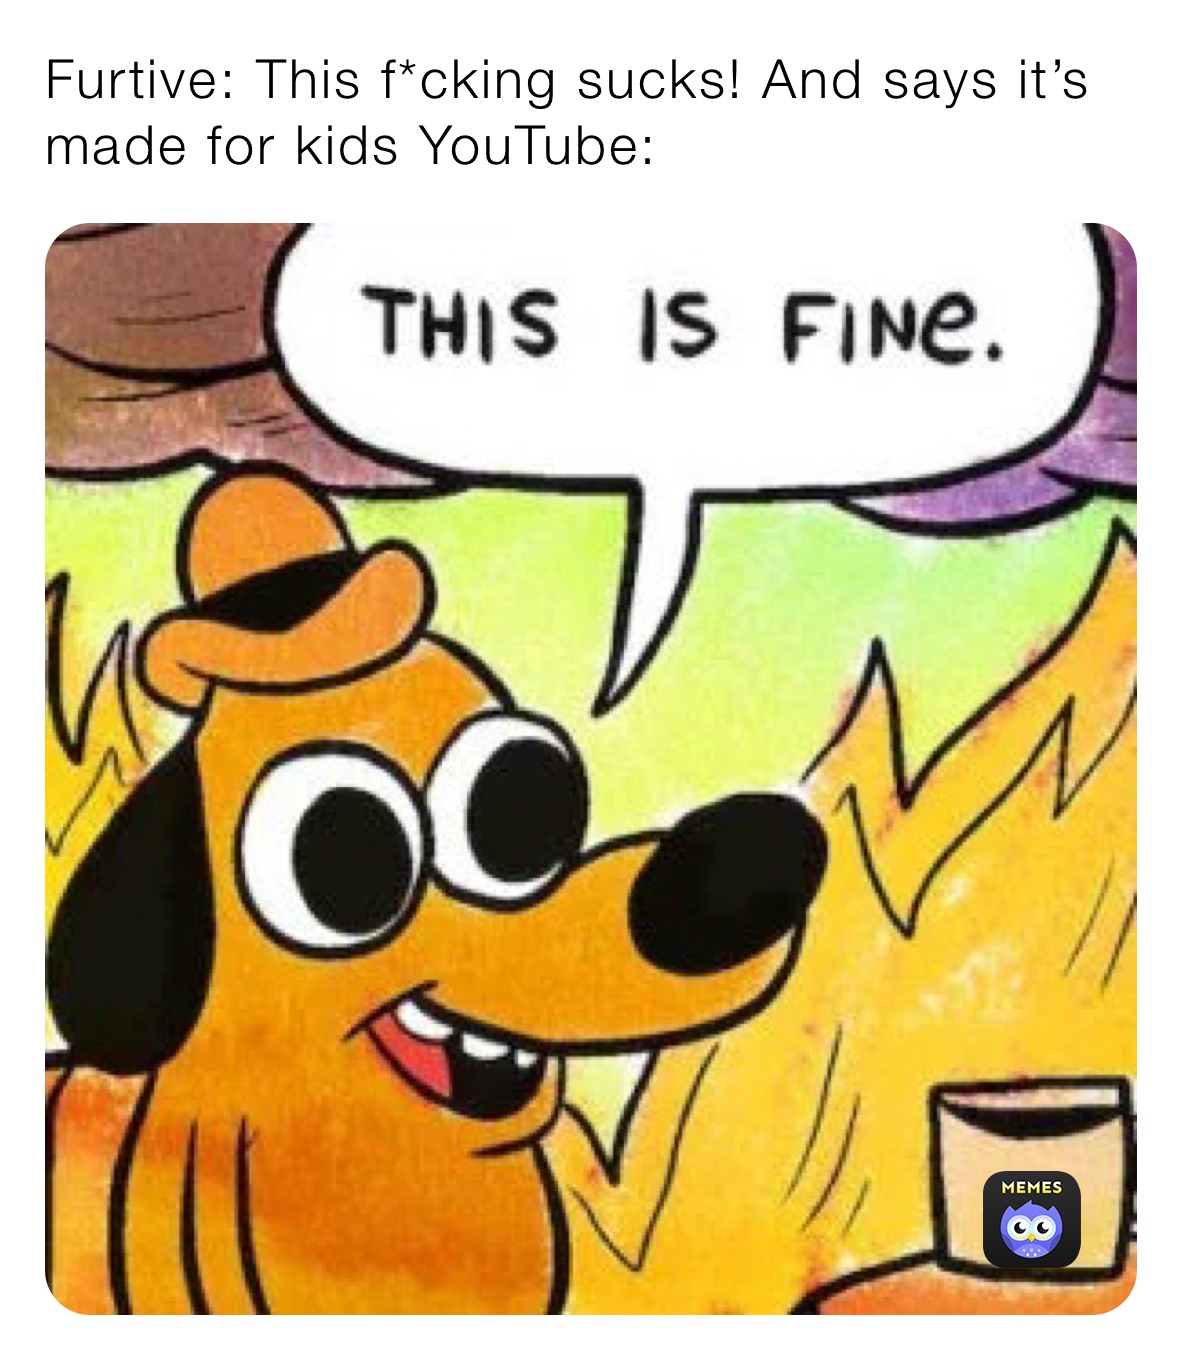 Furtive: This f*cking sucks! And says it’s made for kids YouTube: